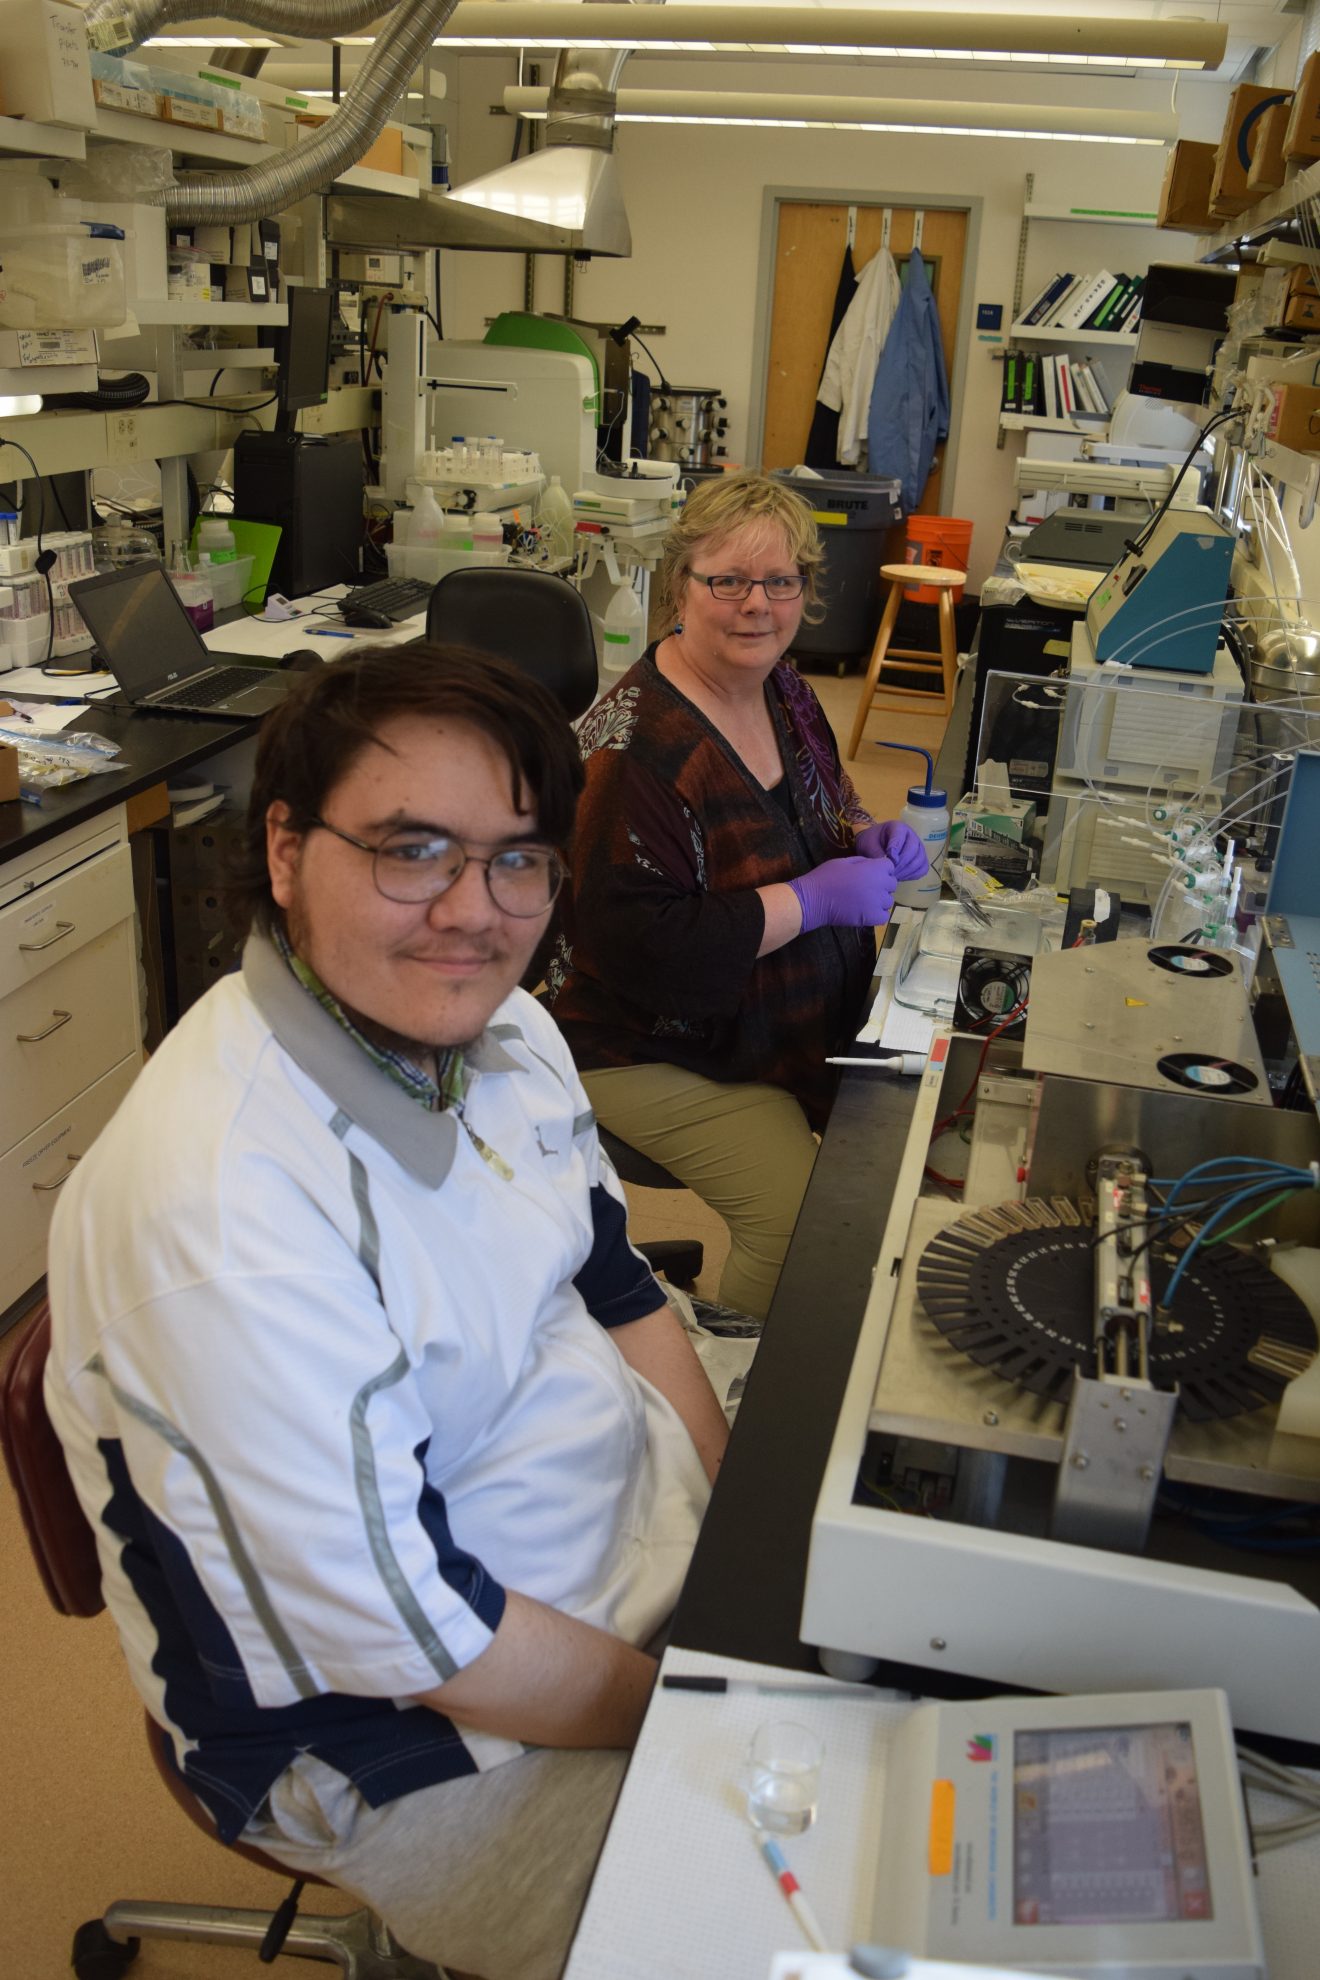 Maggie Castellini (right) works with Ilisagvik undergraduate Devon Kignak-Brower in the lab. Kignak-Brower visited UAF in May and early June 2018 for a summer research experience as part of Dr. Todd O’Hara’s BLaST faculty pilot project.